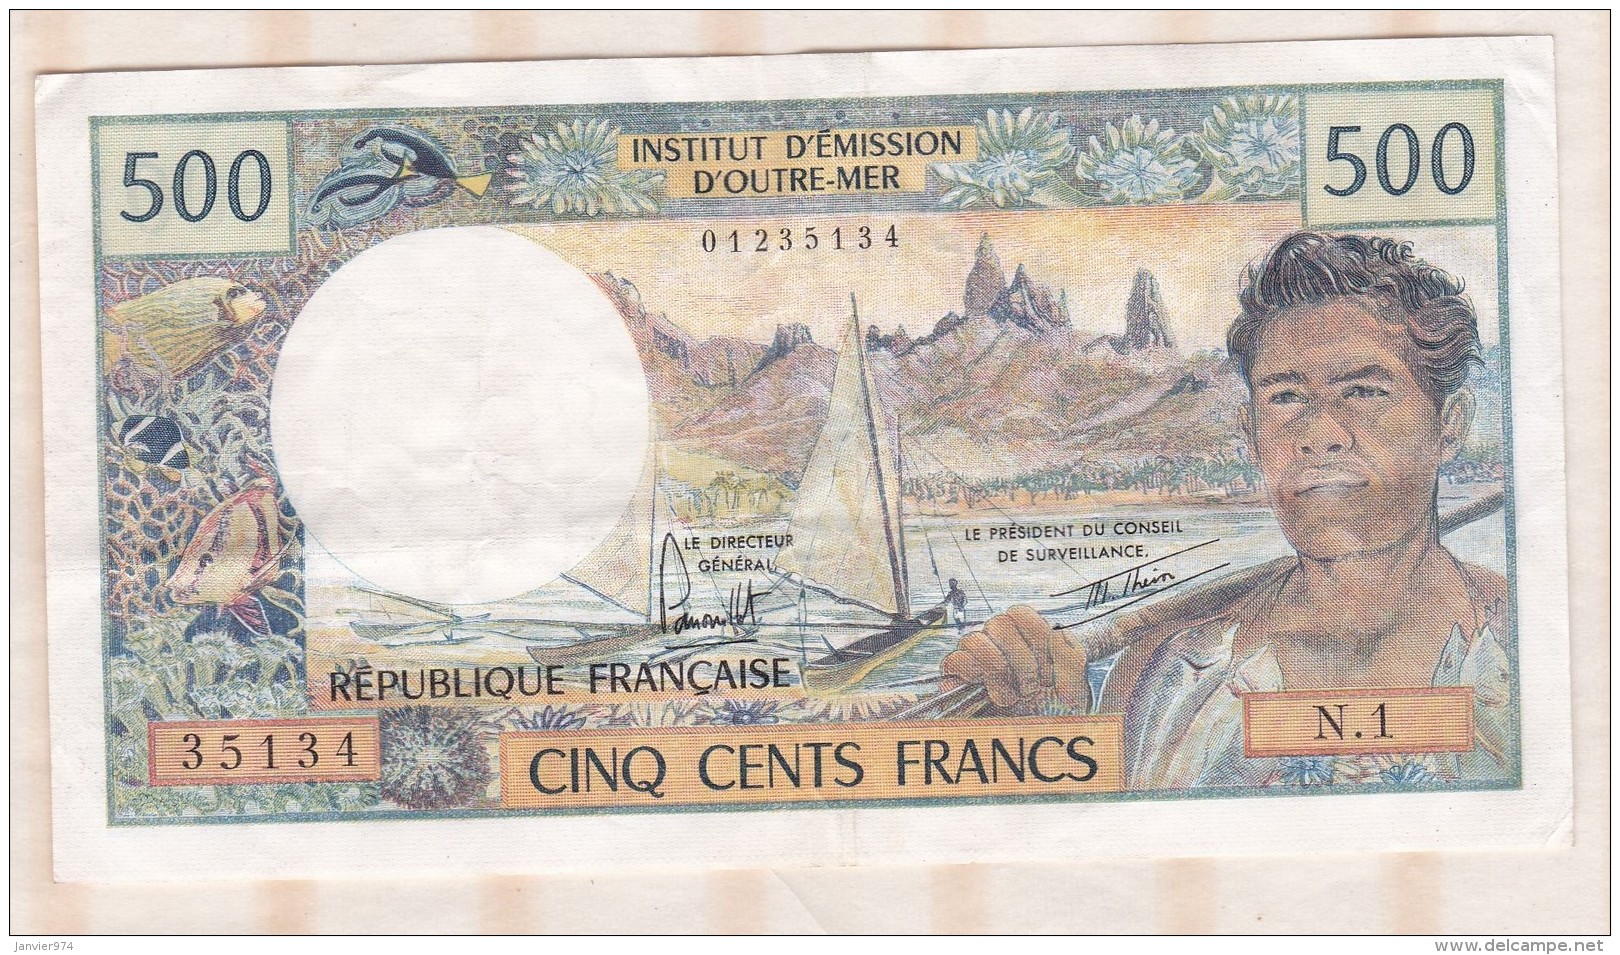 Institut D émission D Outre Mer ,  500 FRANCS  PAPEETE, Alphabet N.1 ,n° 35134 - Papeete (French Polynesia 1914-1985)